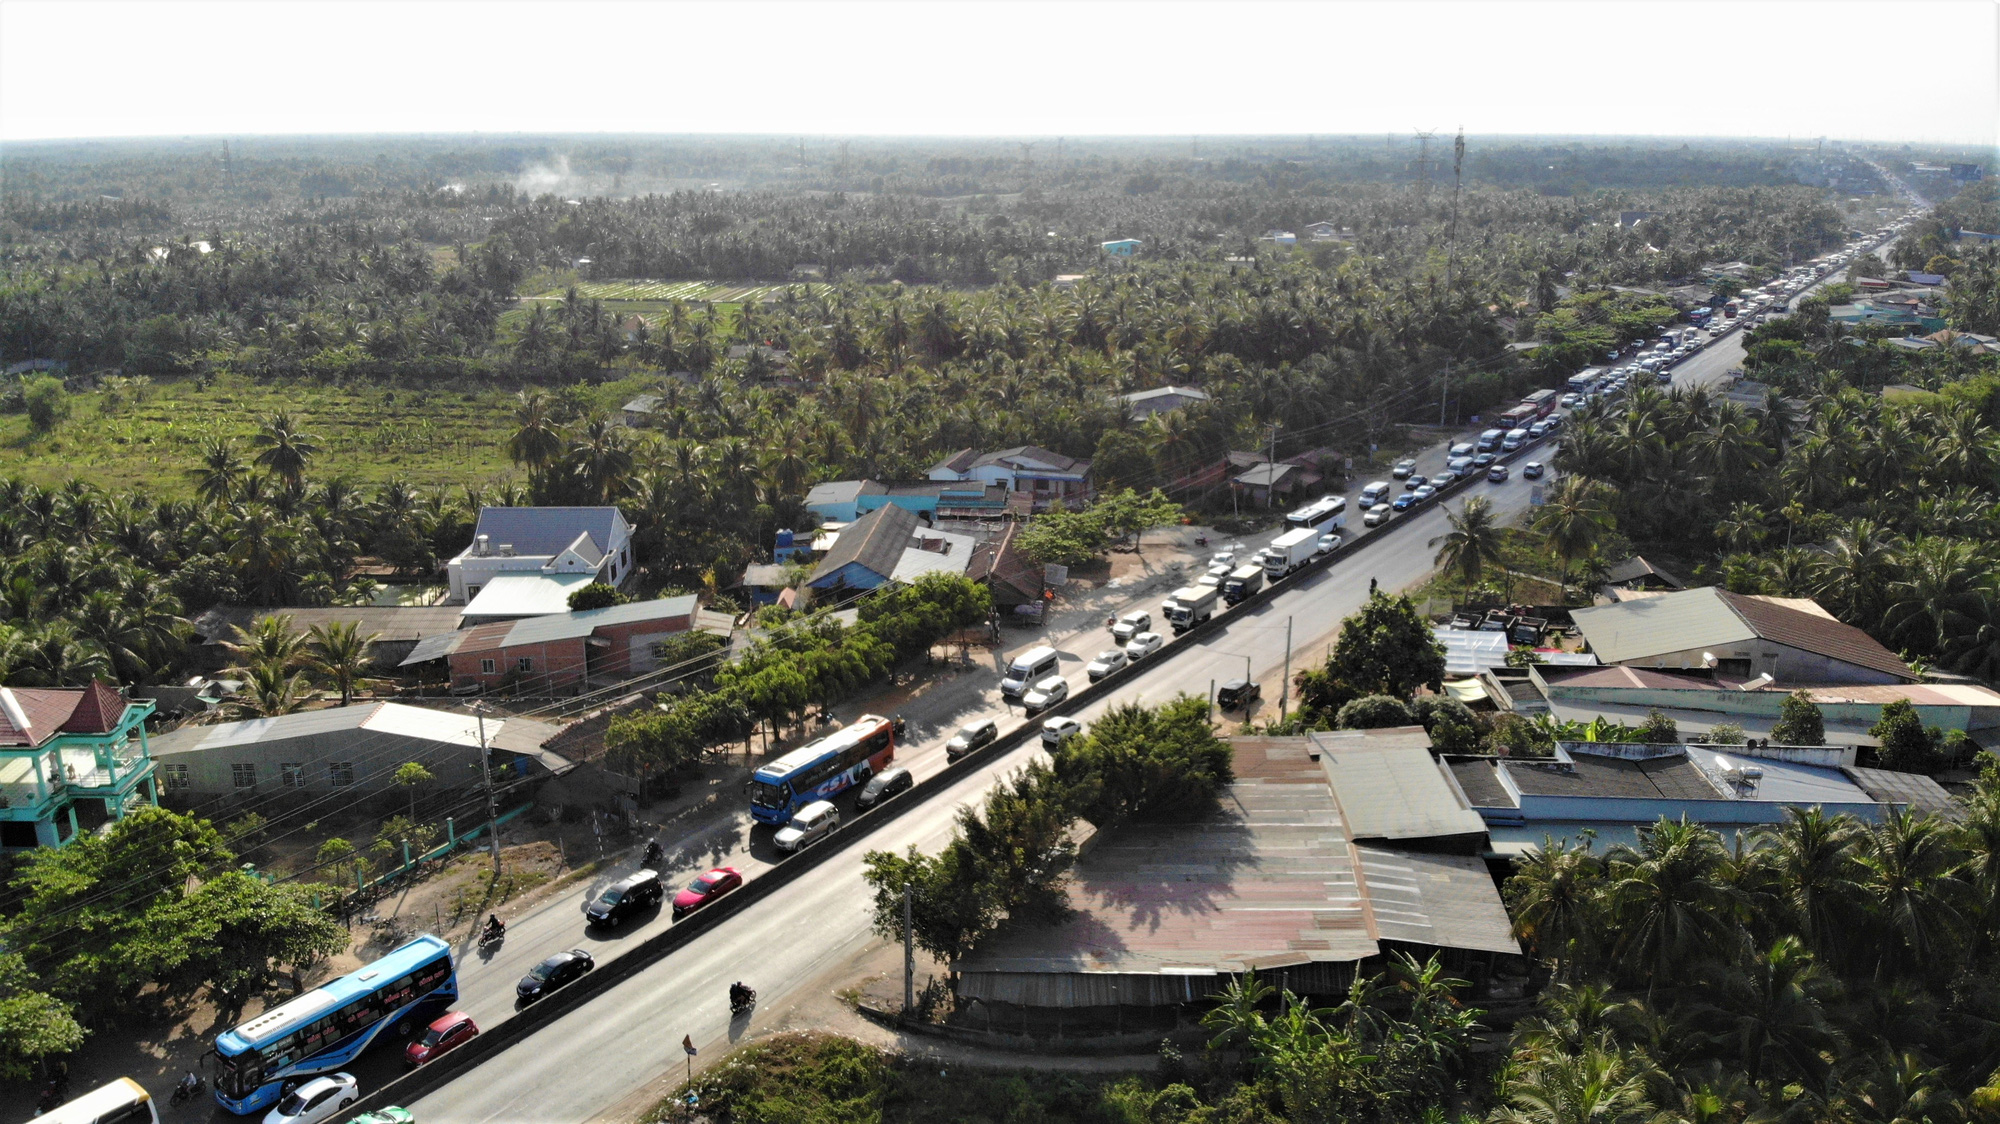 A bird’s-eye view of congestion on National Highway 1 on January 29, 2020. Photo: Mau Truong / Tuoi Tre